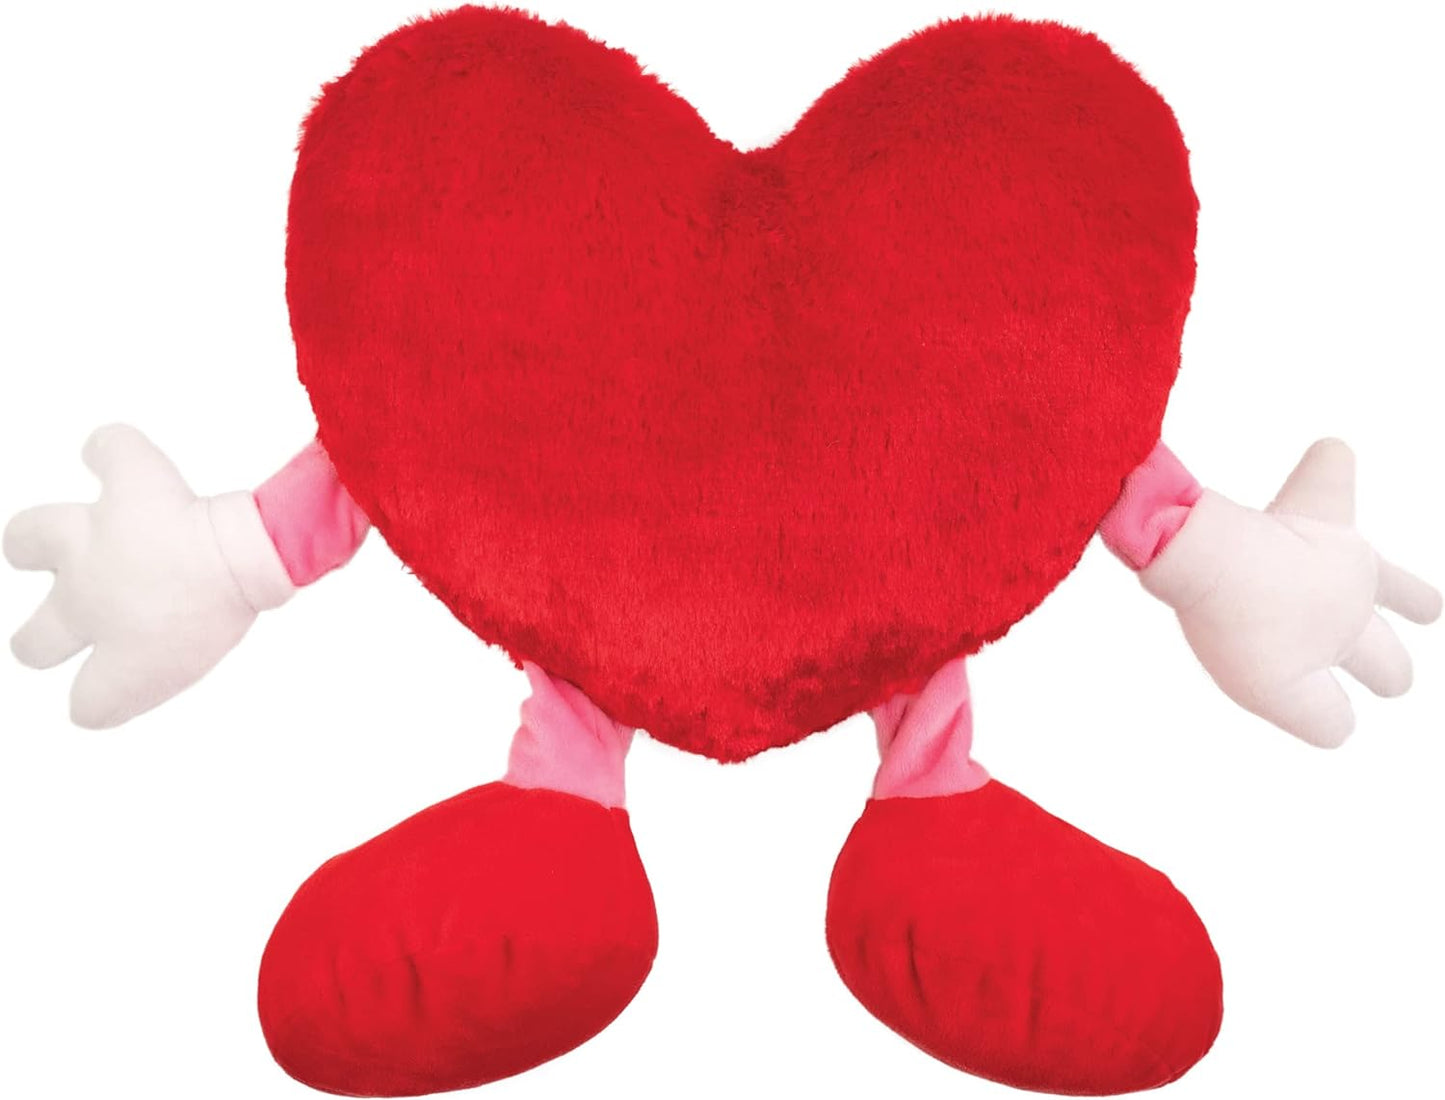 Sweetheart (Heart) - 10" Strawberry Scented Stuffed Plush - Valentines, Gifts for Kids, Gift Guide